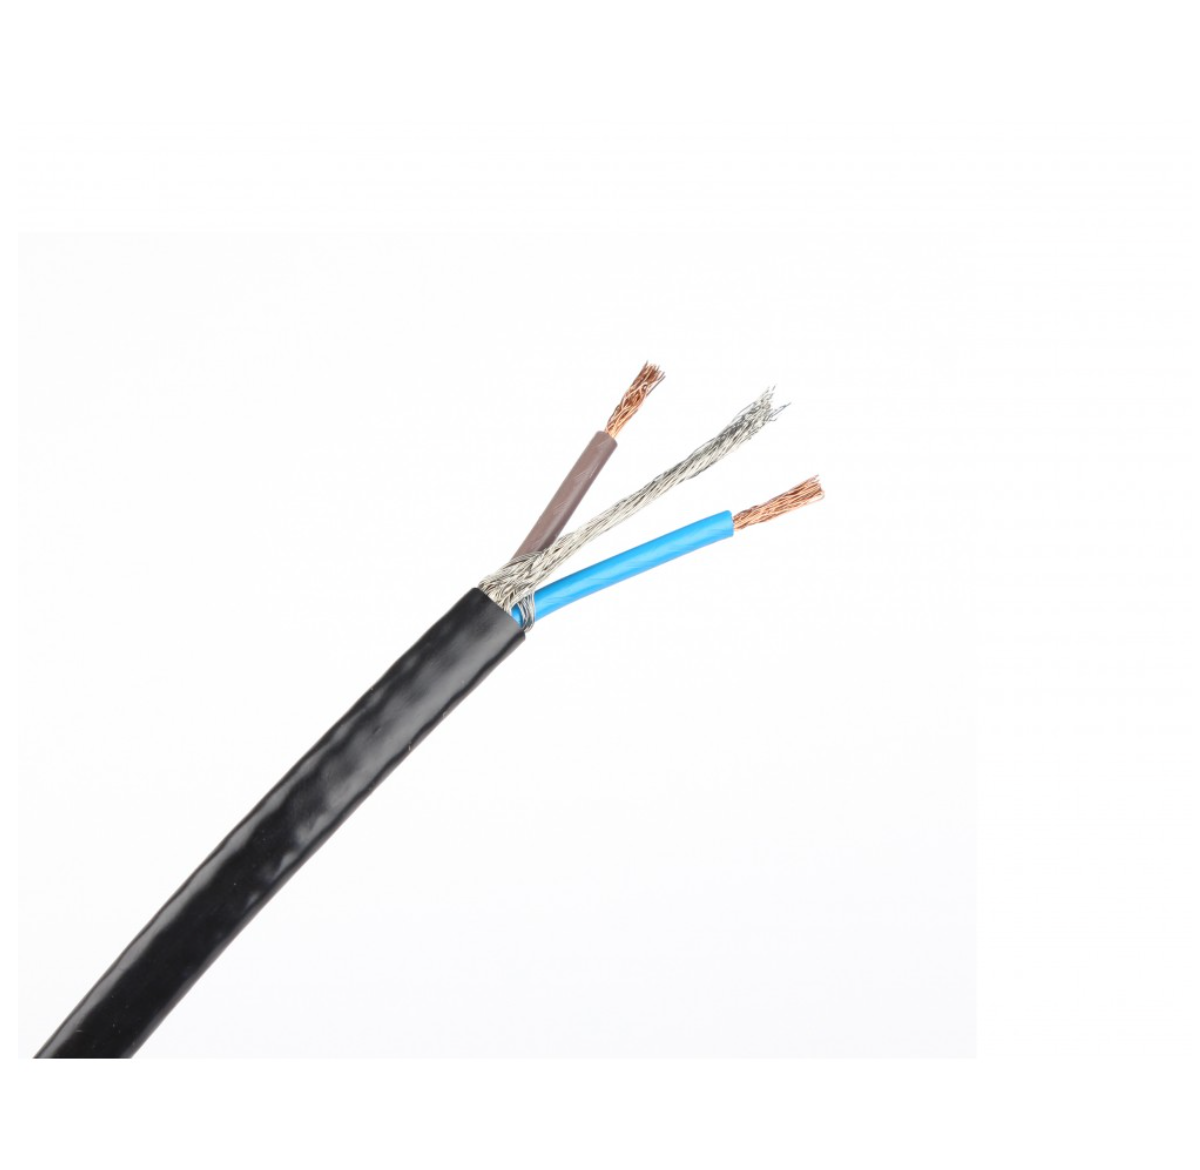 Heating cable - 260m